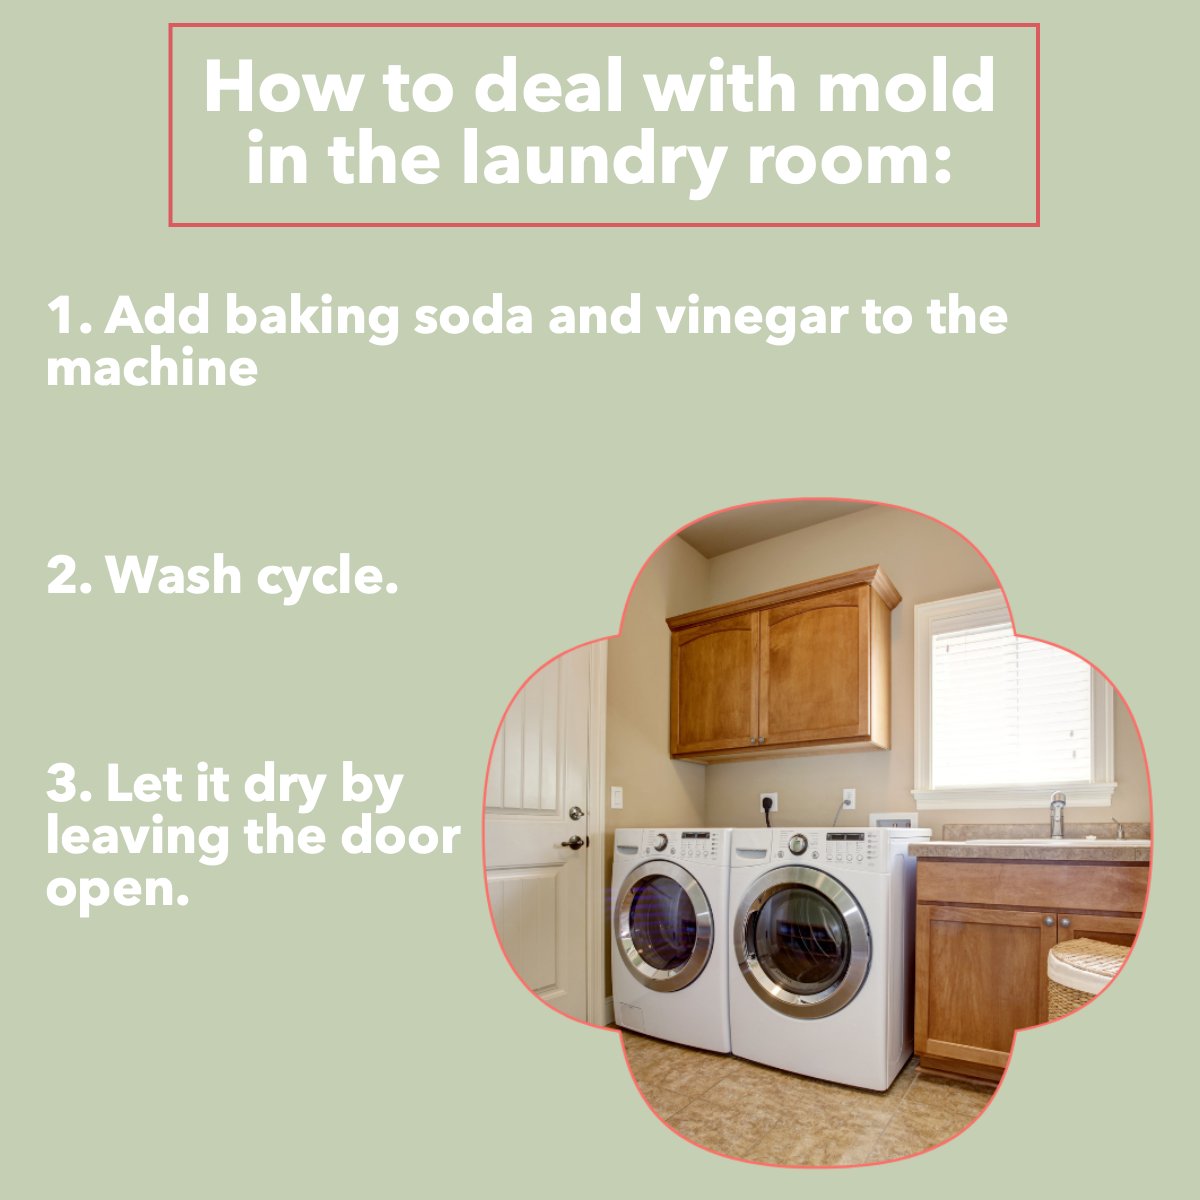 Tired to deal with mold in your laundry room😫 check tips below 🧺

#laundryroom #laundryroomgoals #laundryroomhacks #cleanhouse
 #socialposts